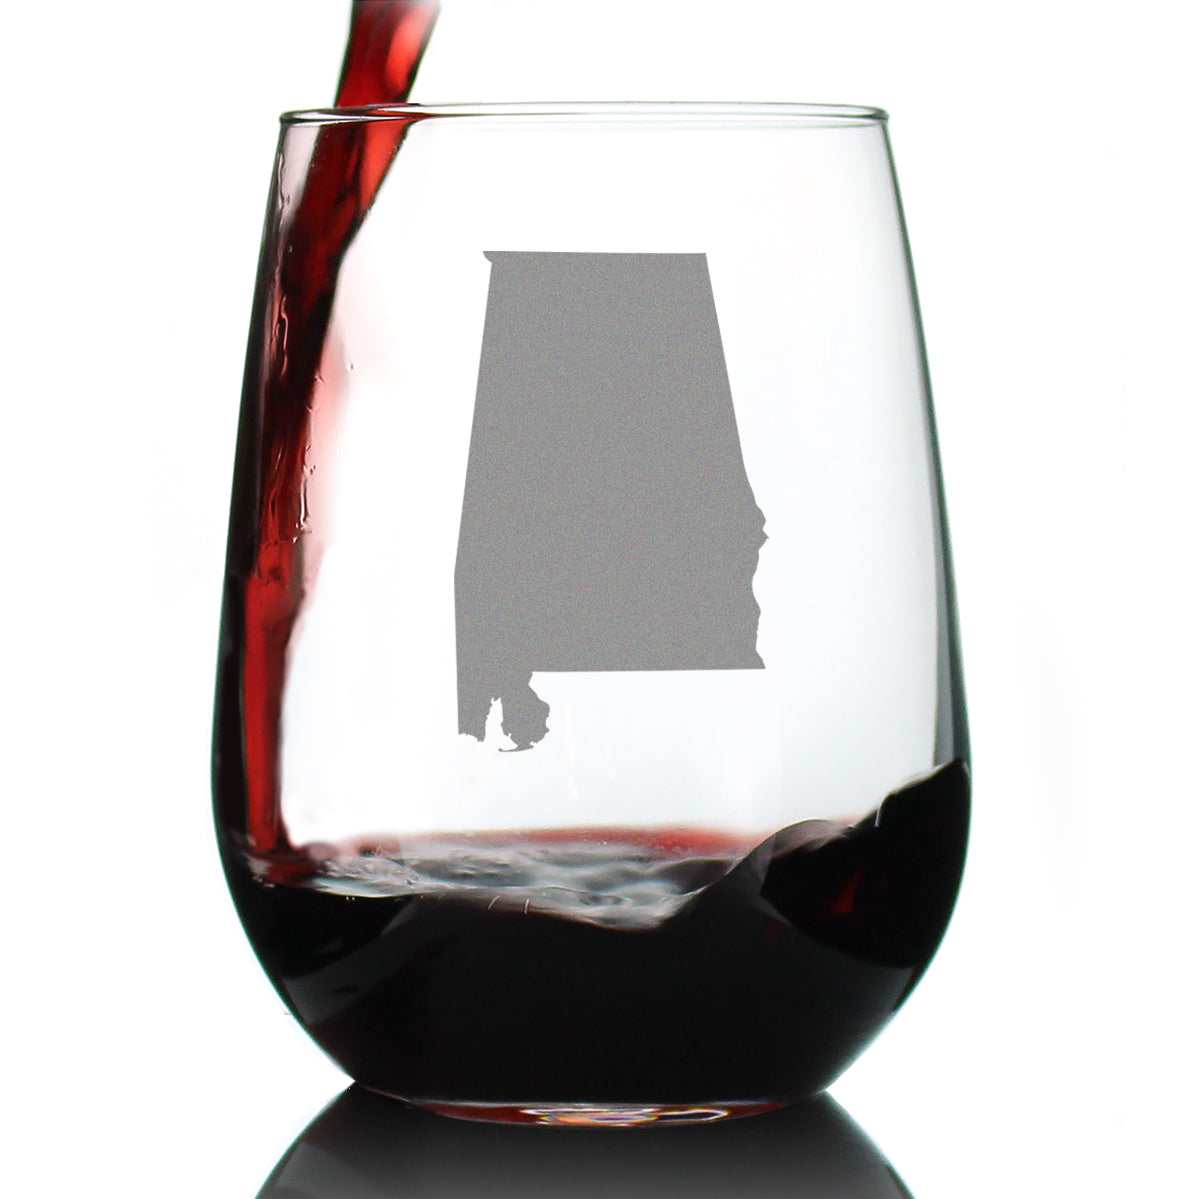 Alabama State Outline Stemless Wine Glass - State Themed Drinking Decor and Gifts for Alabaman Women & Men - Large 17 Oz Glasses